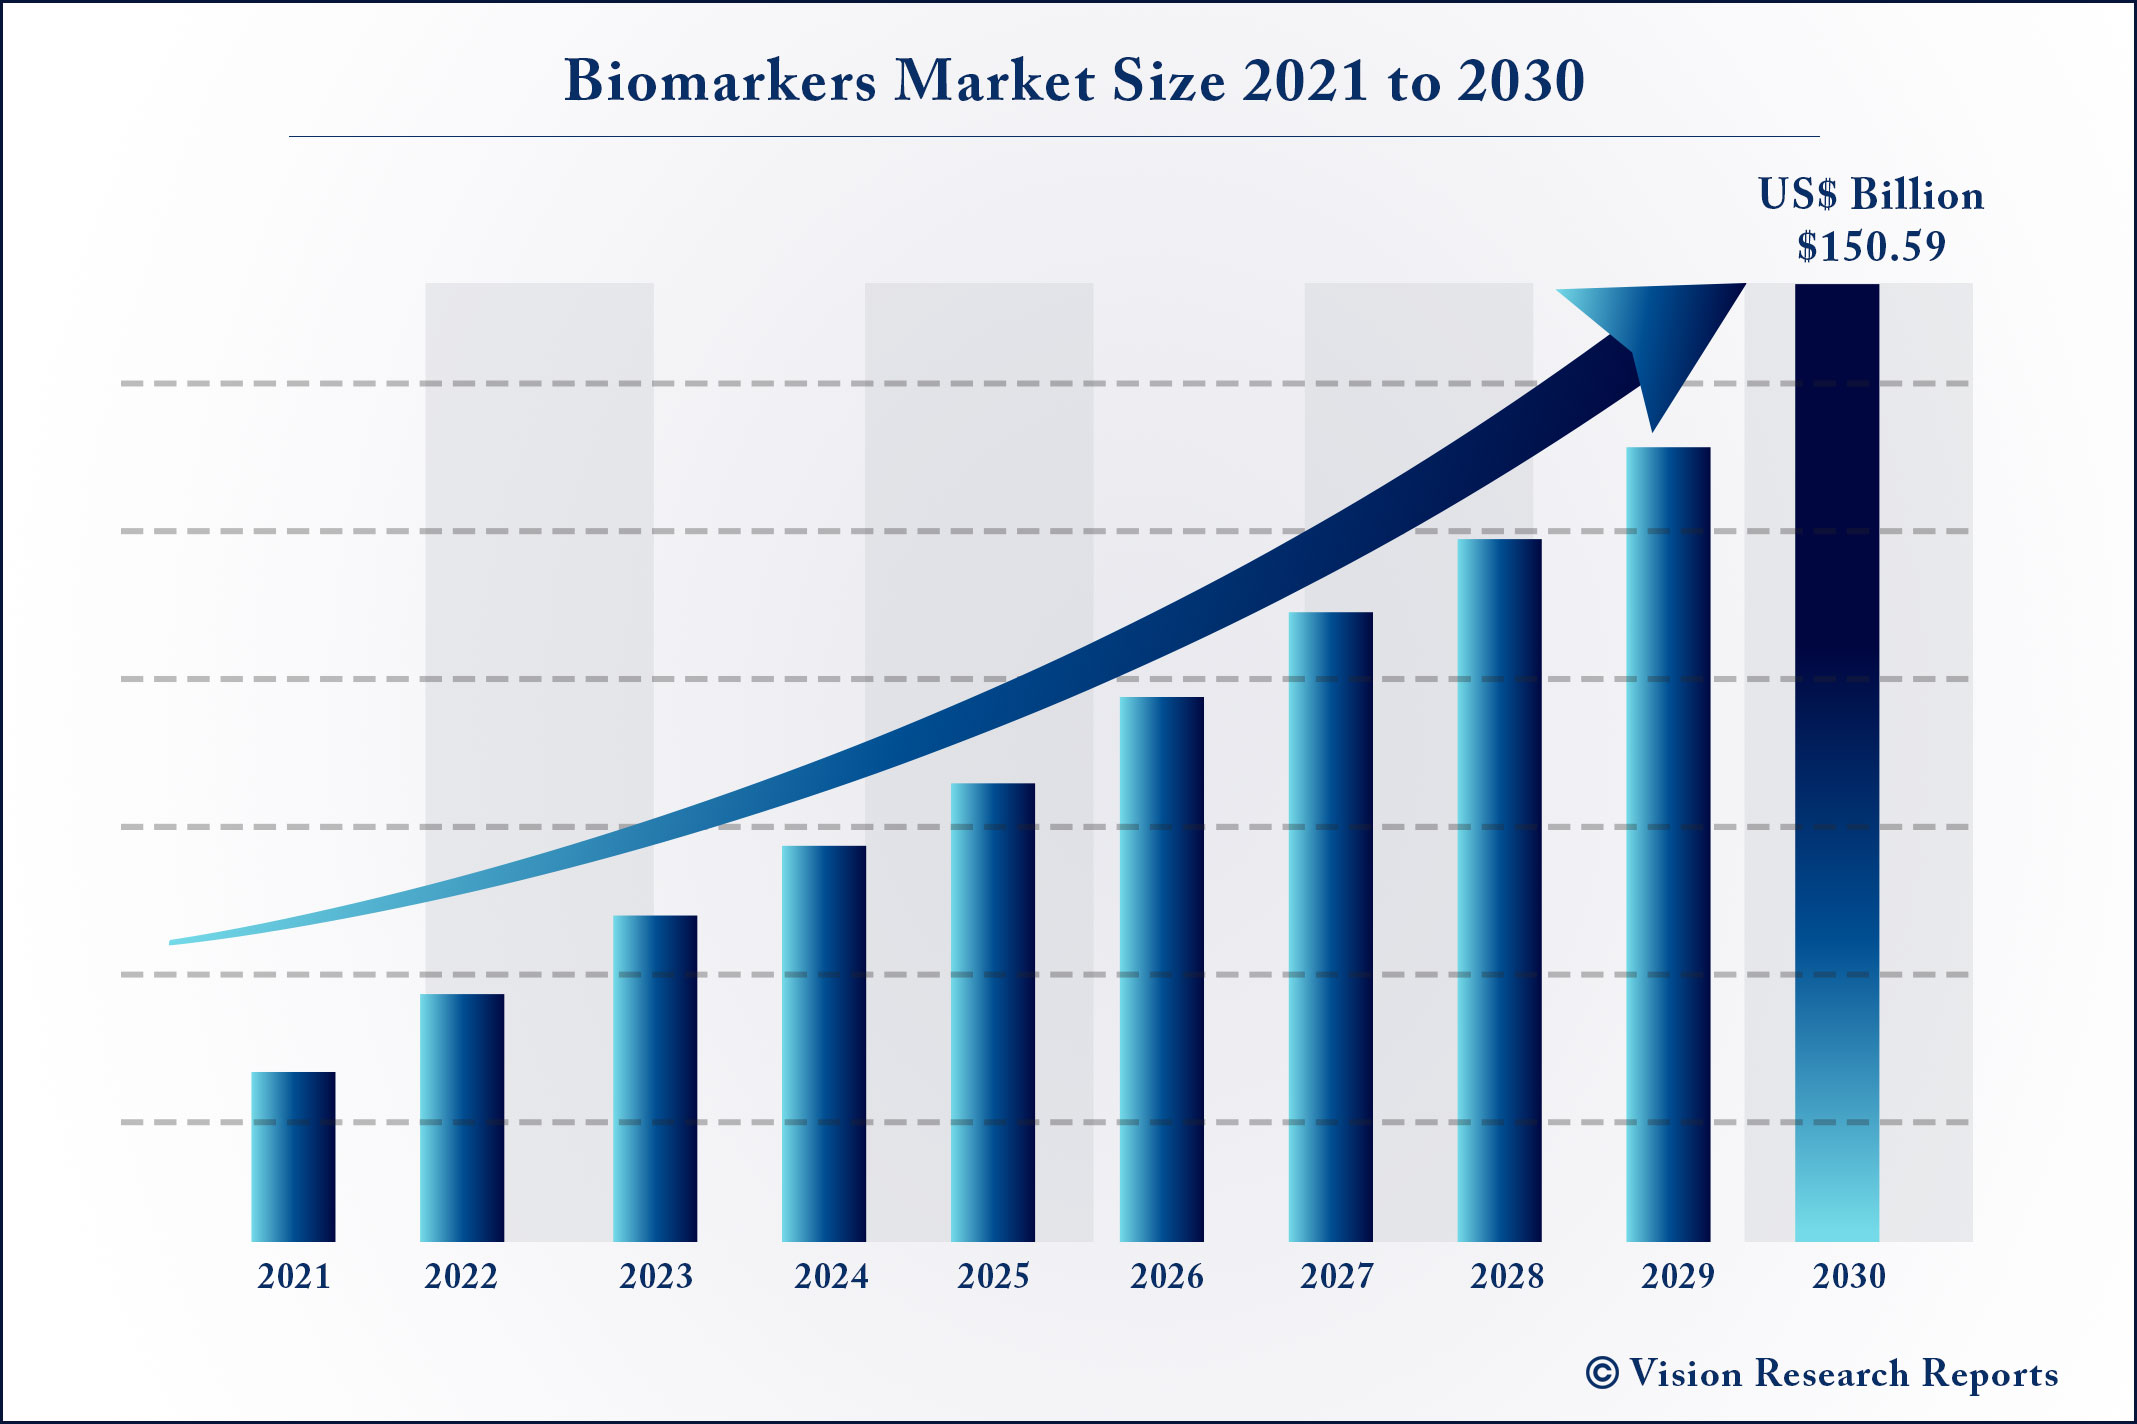 Biomarkers Market Size 2021 to 2030